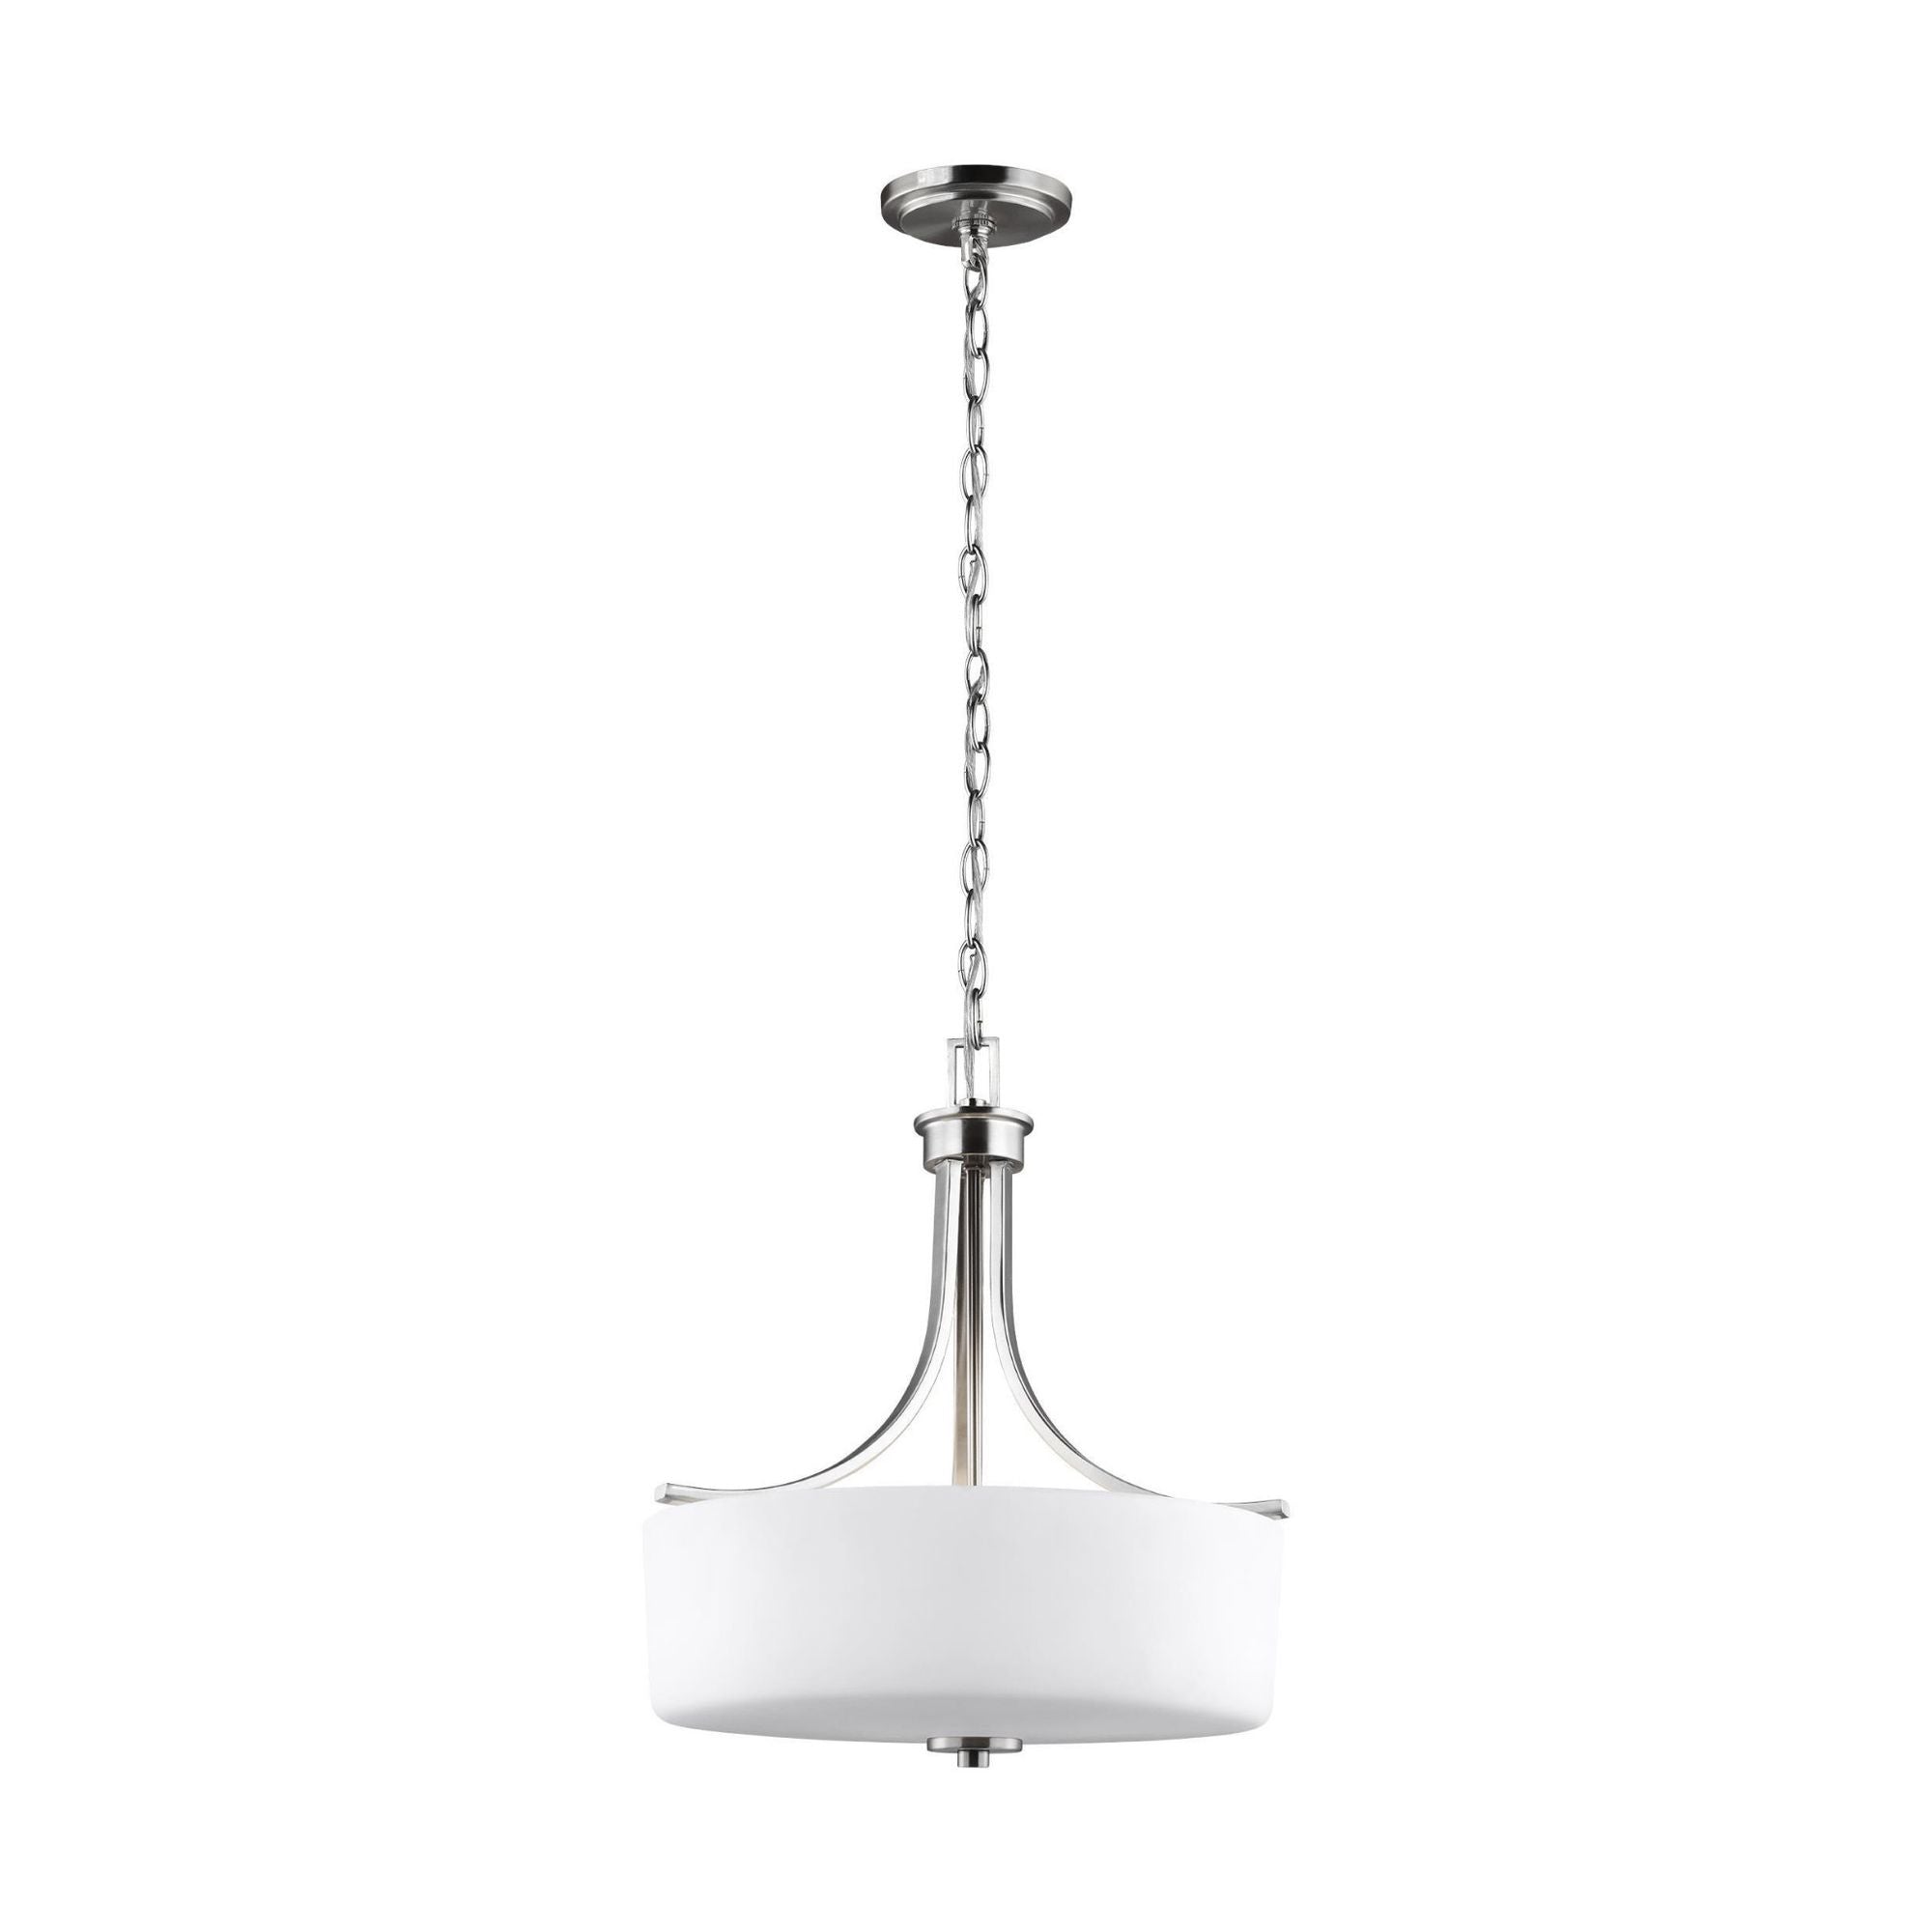 Canfield Three Light Pendant LED Modern 18.5" Height Steel Round Etched / White Inside Shade in Brushed Nickel